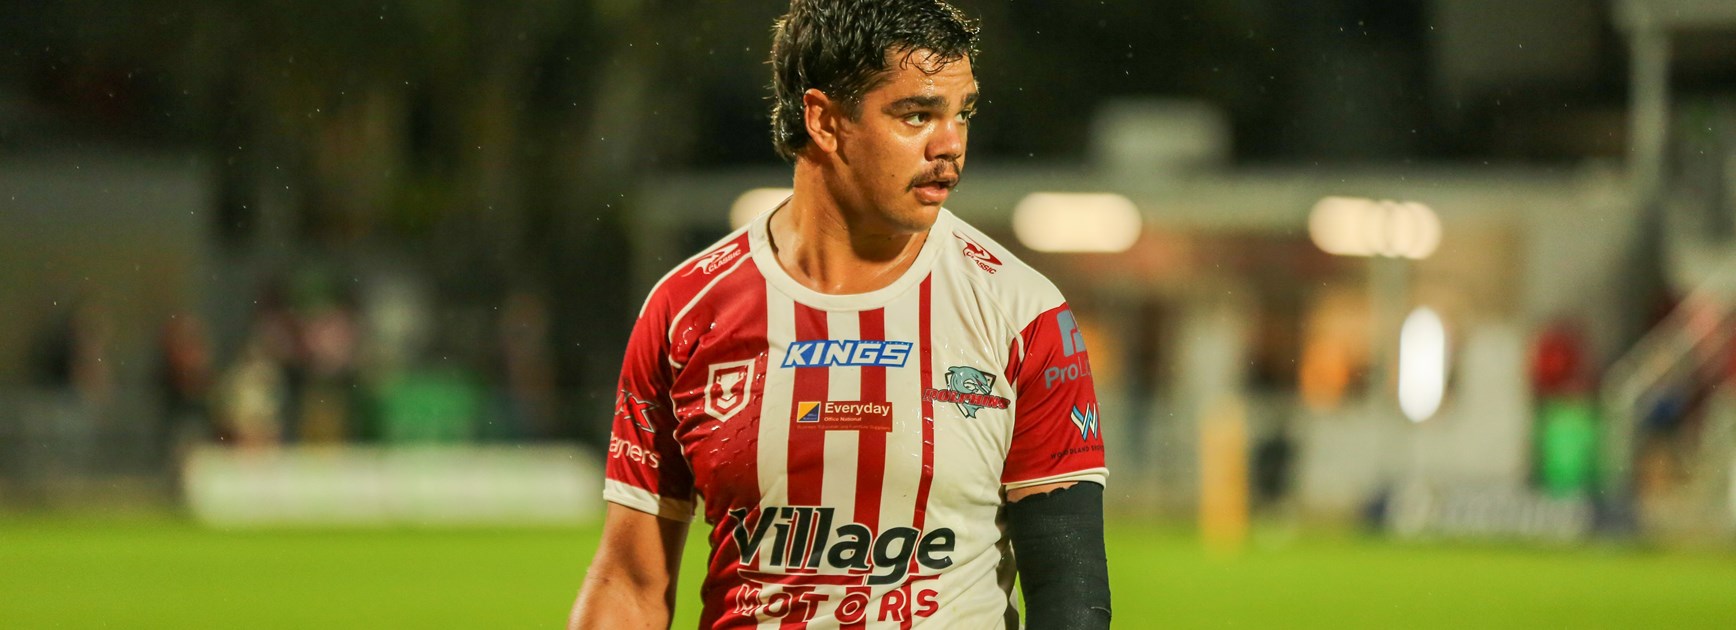 Round 12 Saturday wrap: Dolphins dominate, Cutters get first win